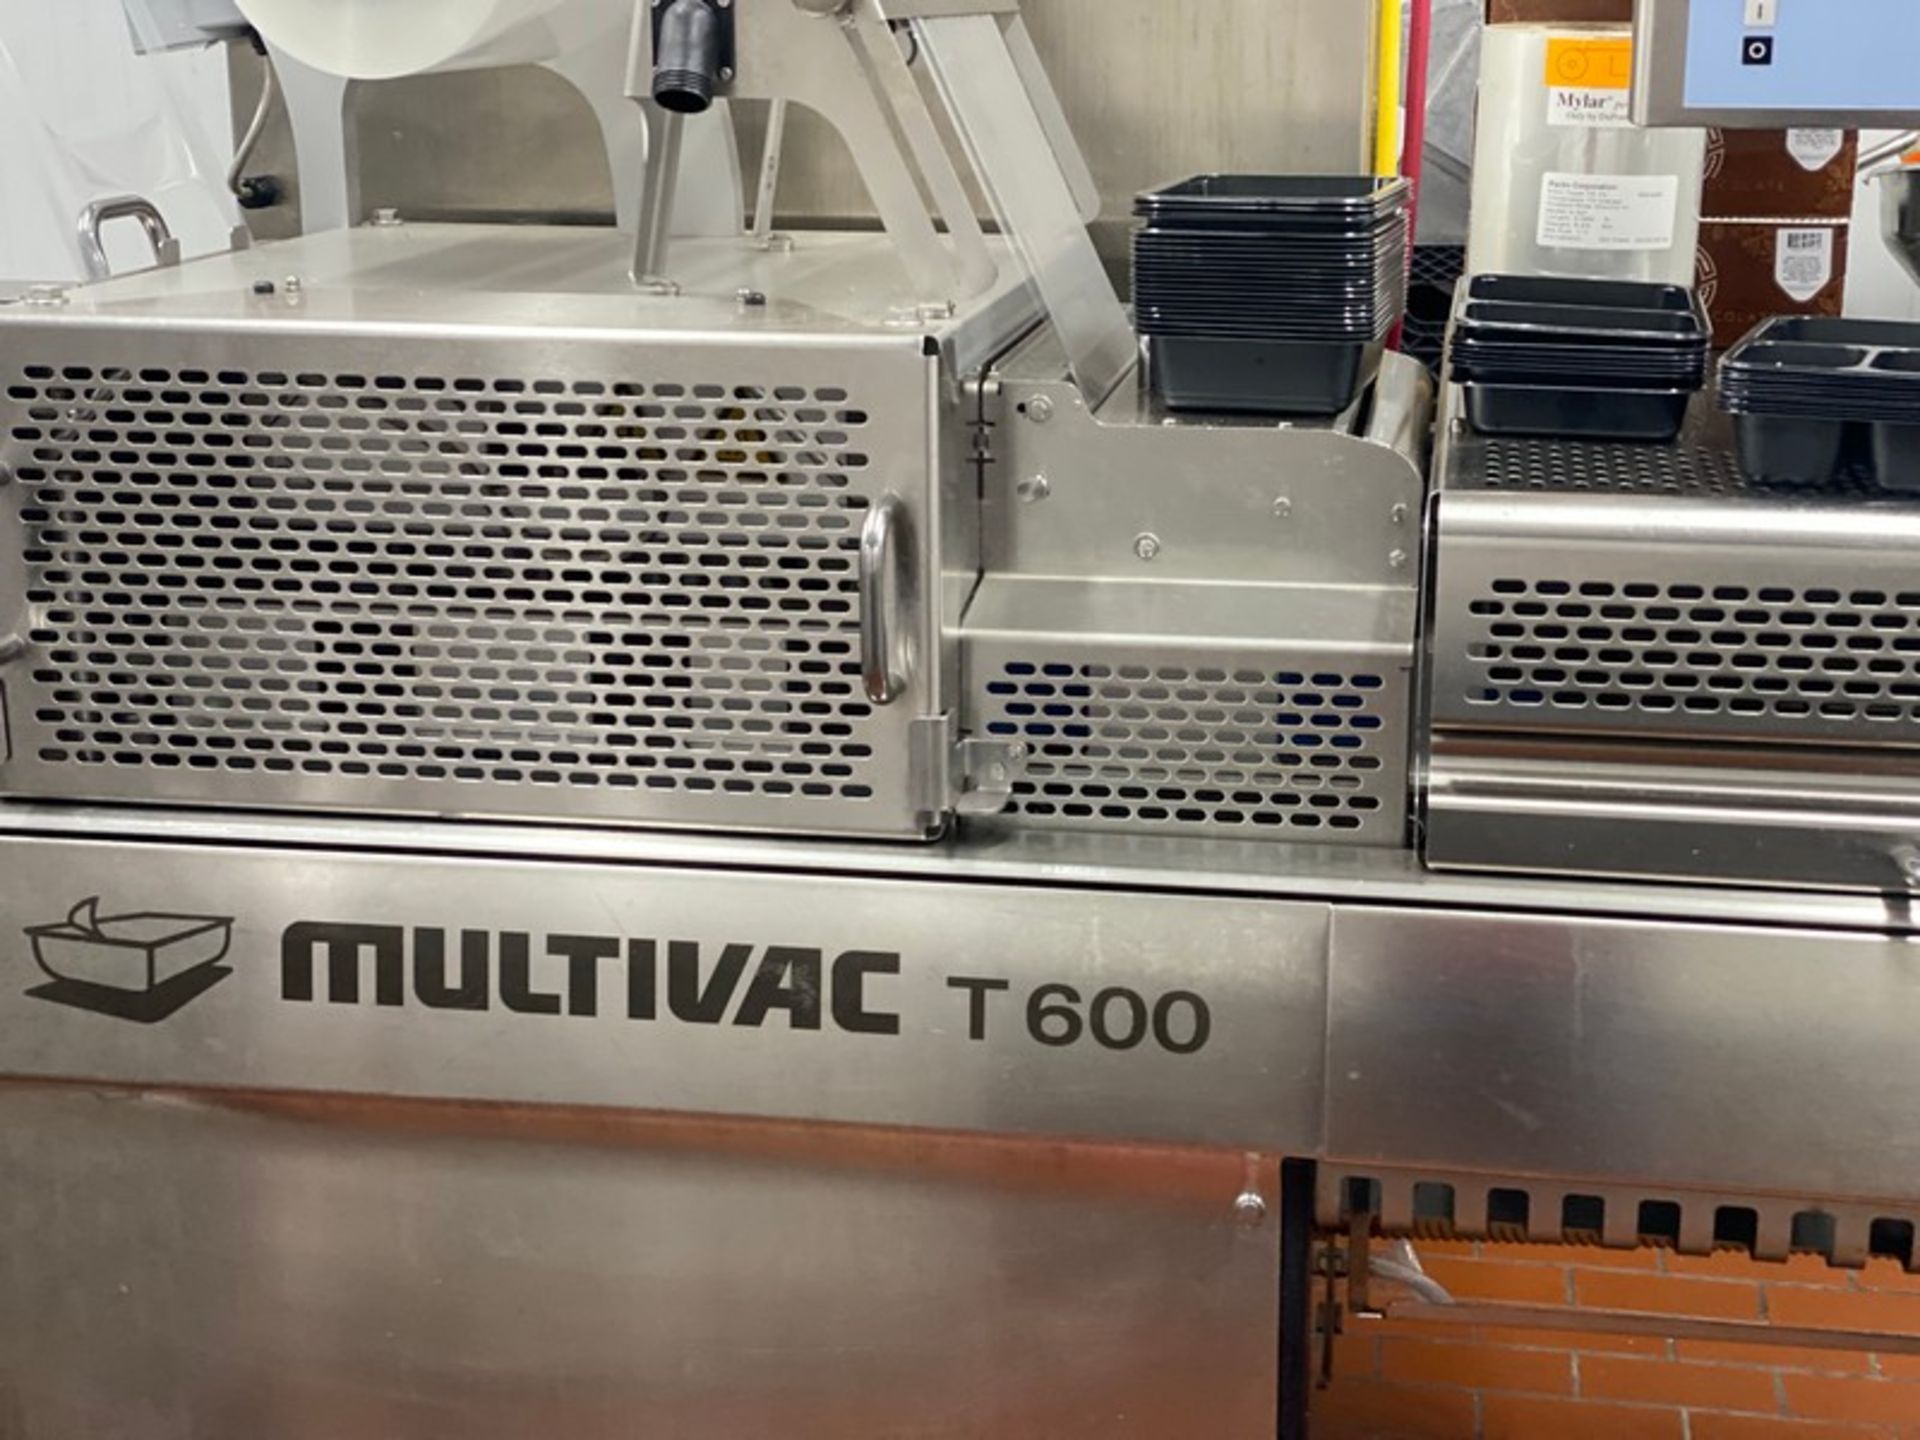 2014 Multivac Compact Automatic Traysealer, Model T600, S/N 196827, Designed for Rapid Product - Image 2 of 12